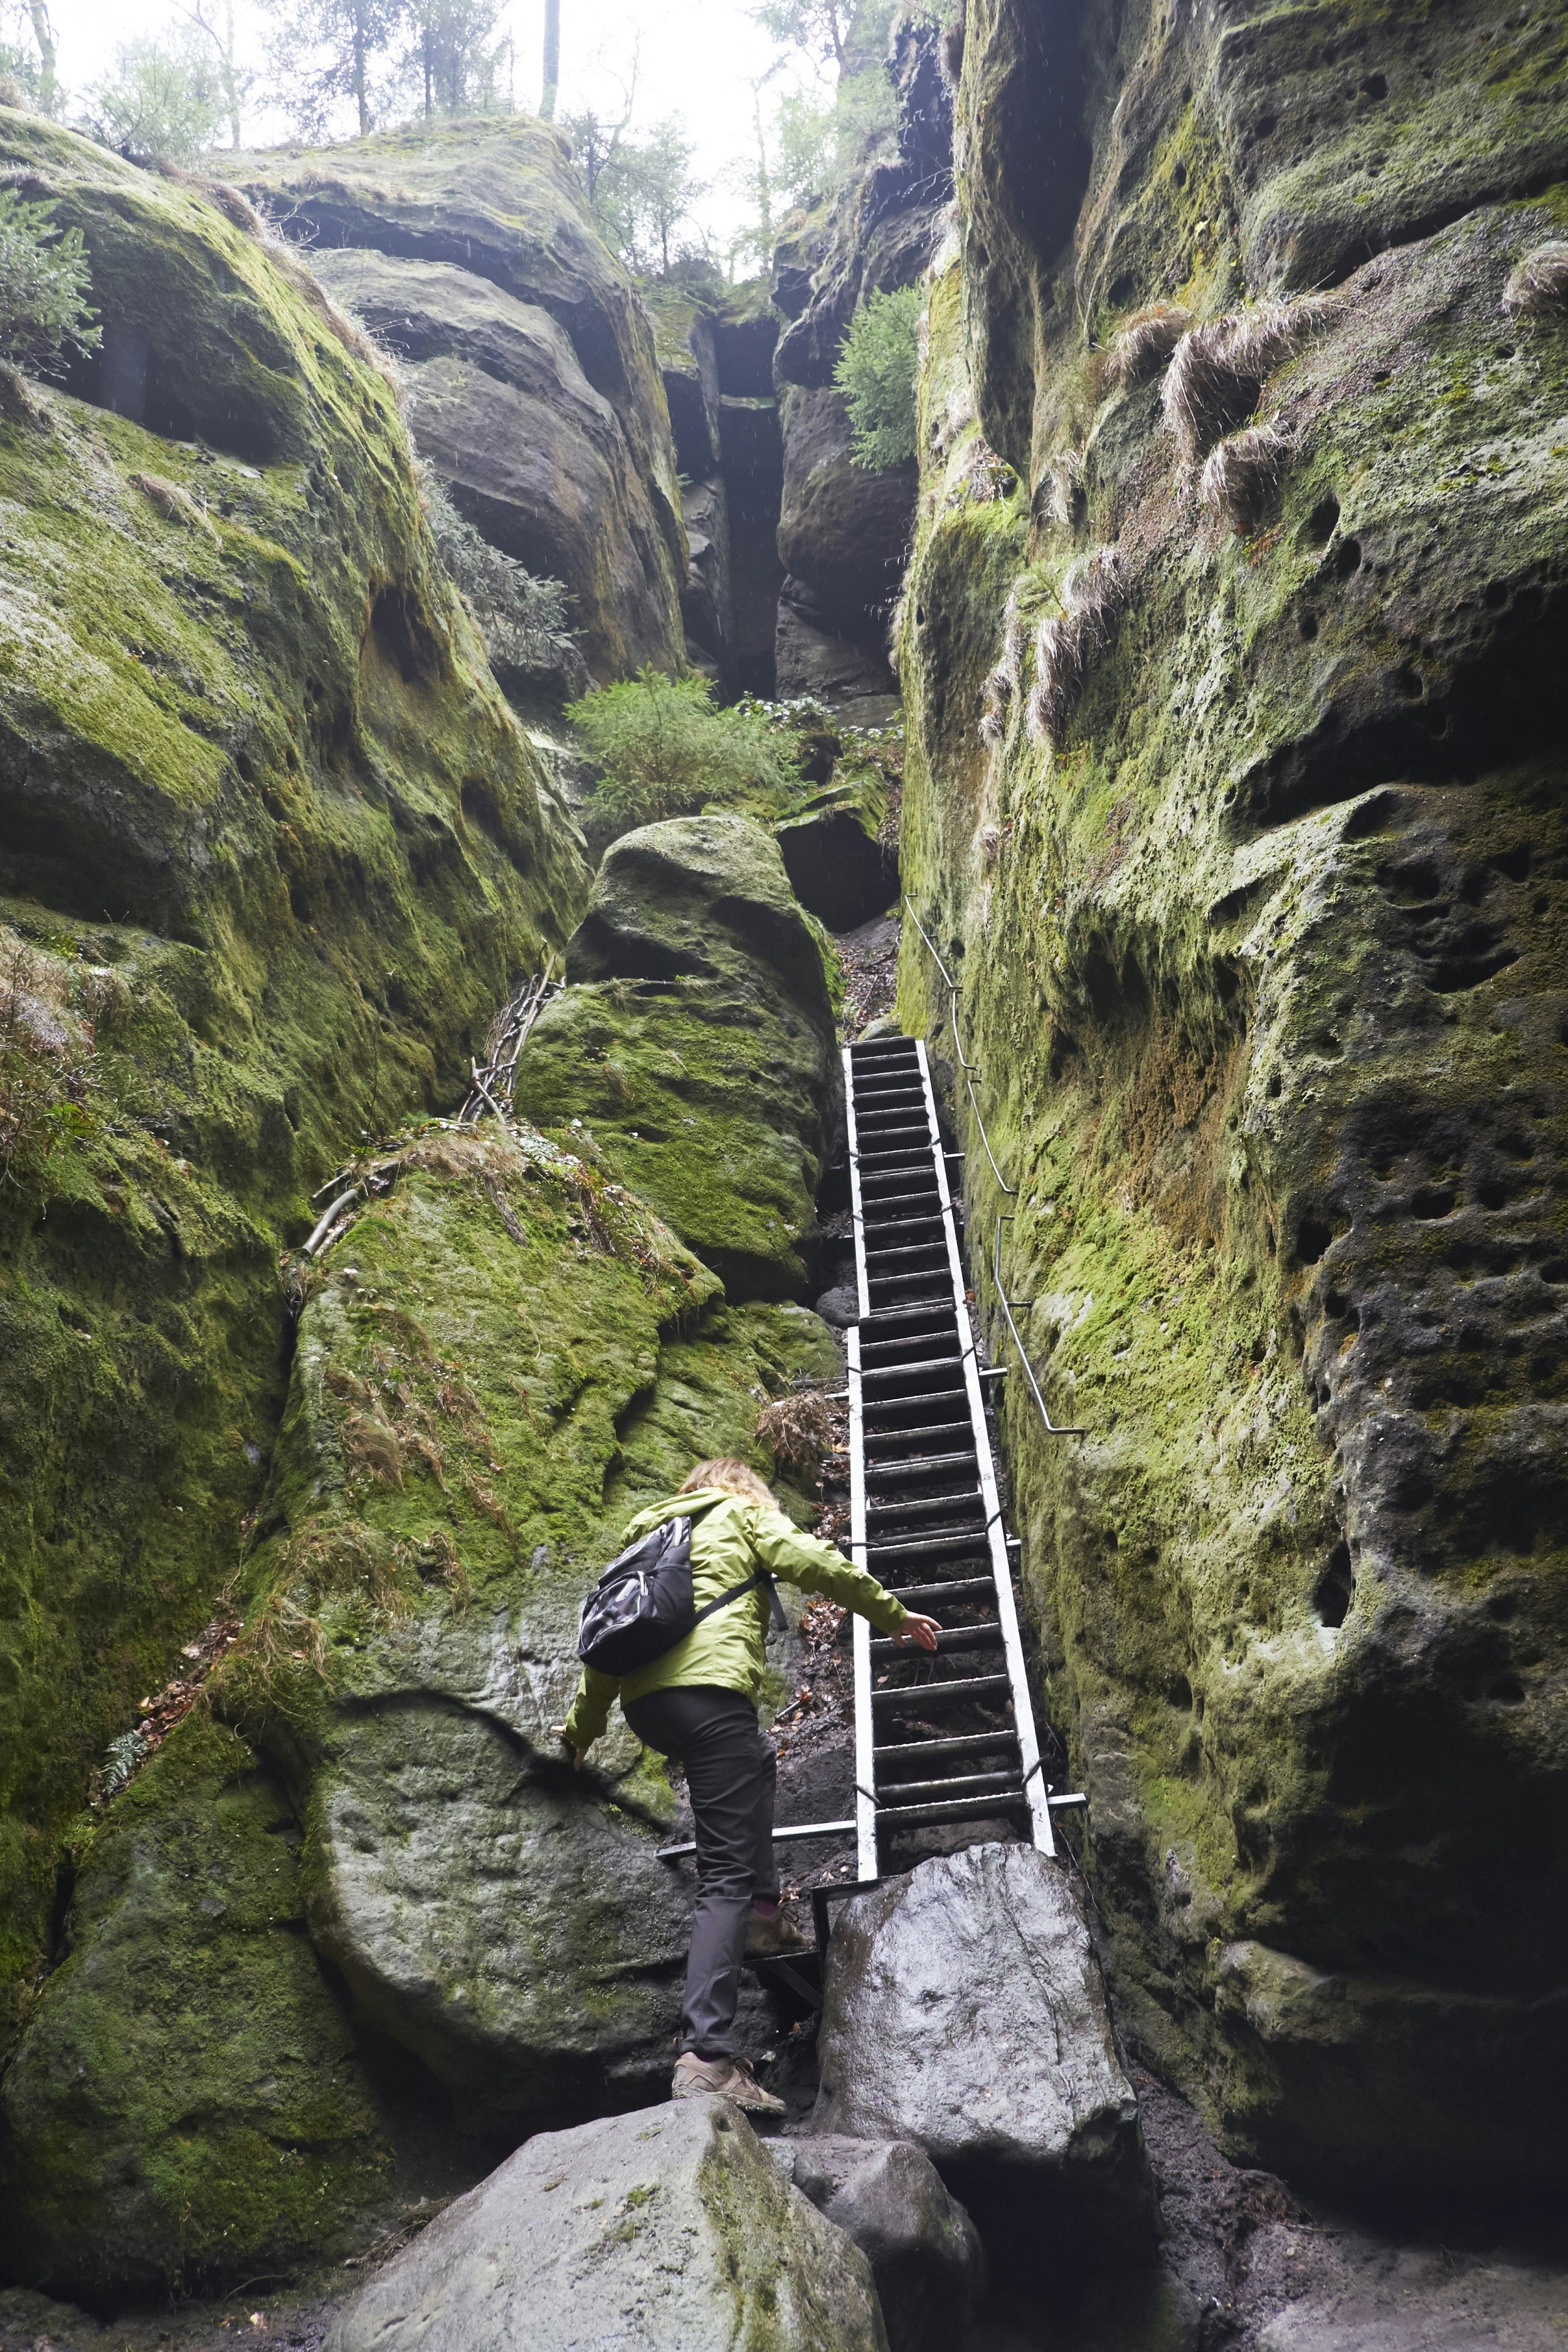 A woman wearing a backpack and goretex outdoor clothing approaches a steep ladder that climbs up moss-covered rocks in a gulley within Saxon Switzerland National Park.